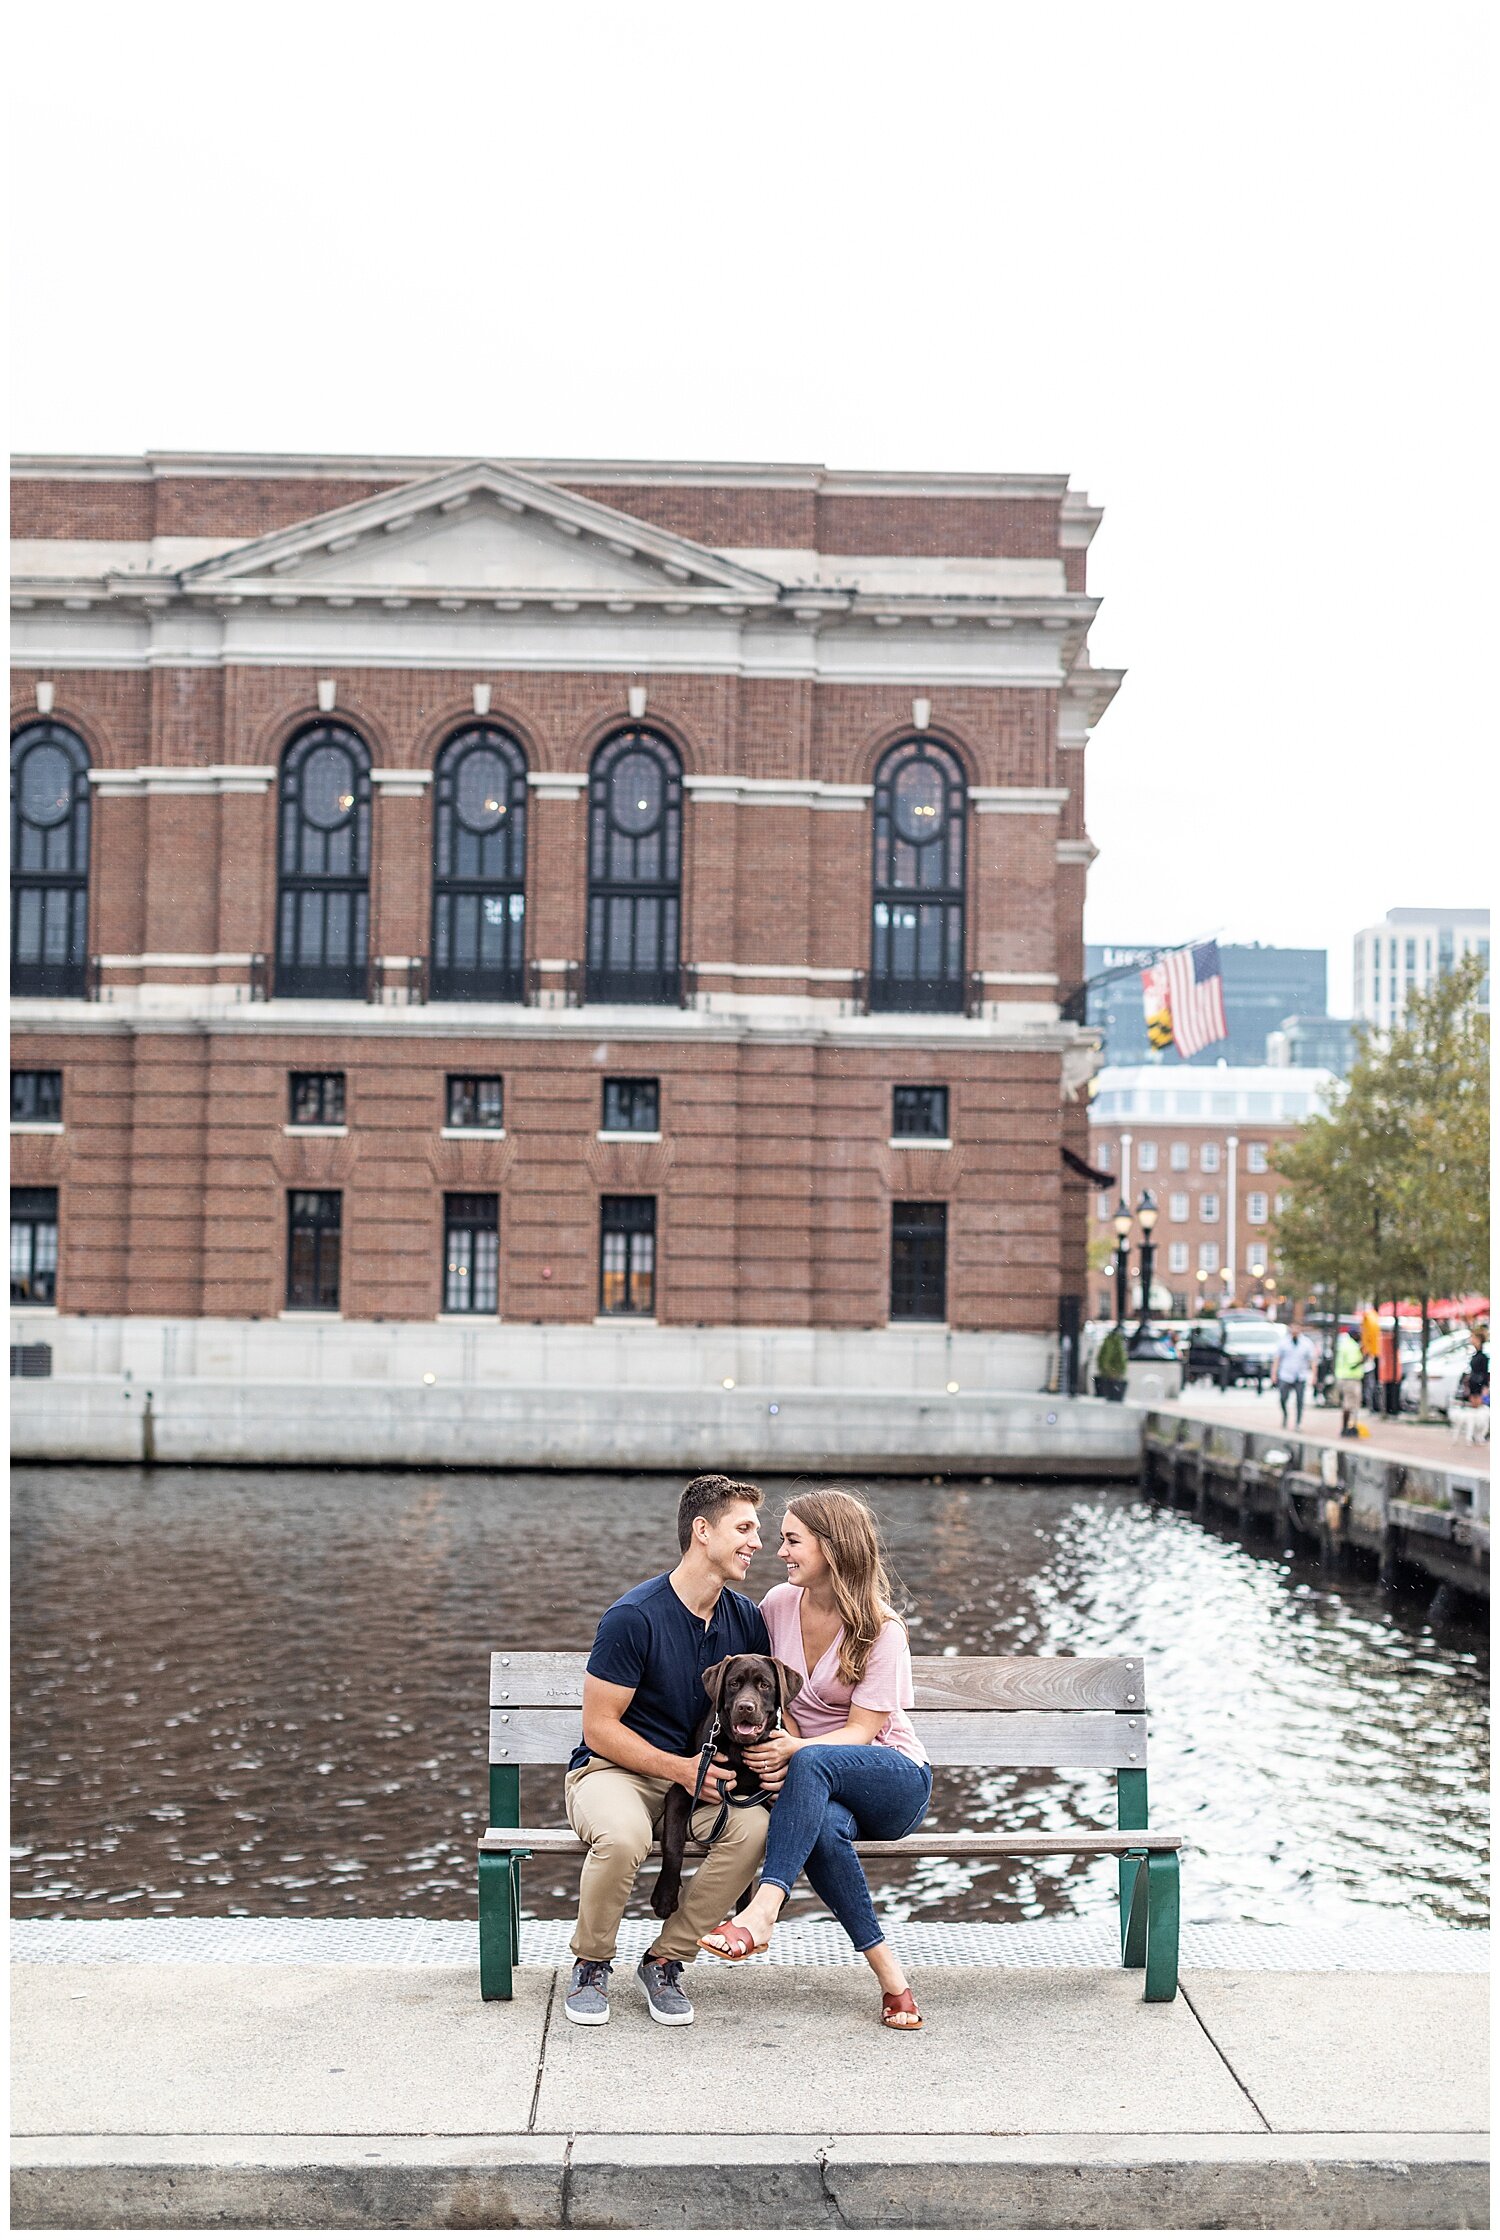 Katie Mitch Fells Point Harbor East Engagement Session 2020 Living Radiant Photography_0029.jpg